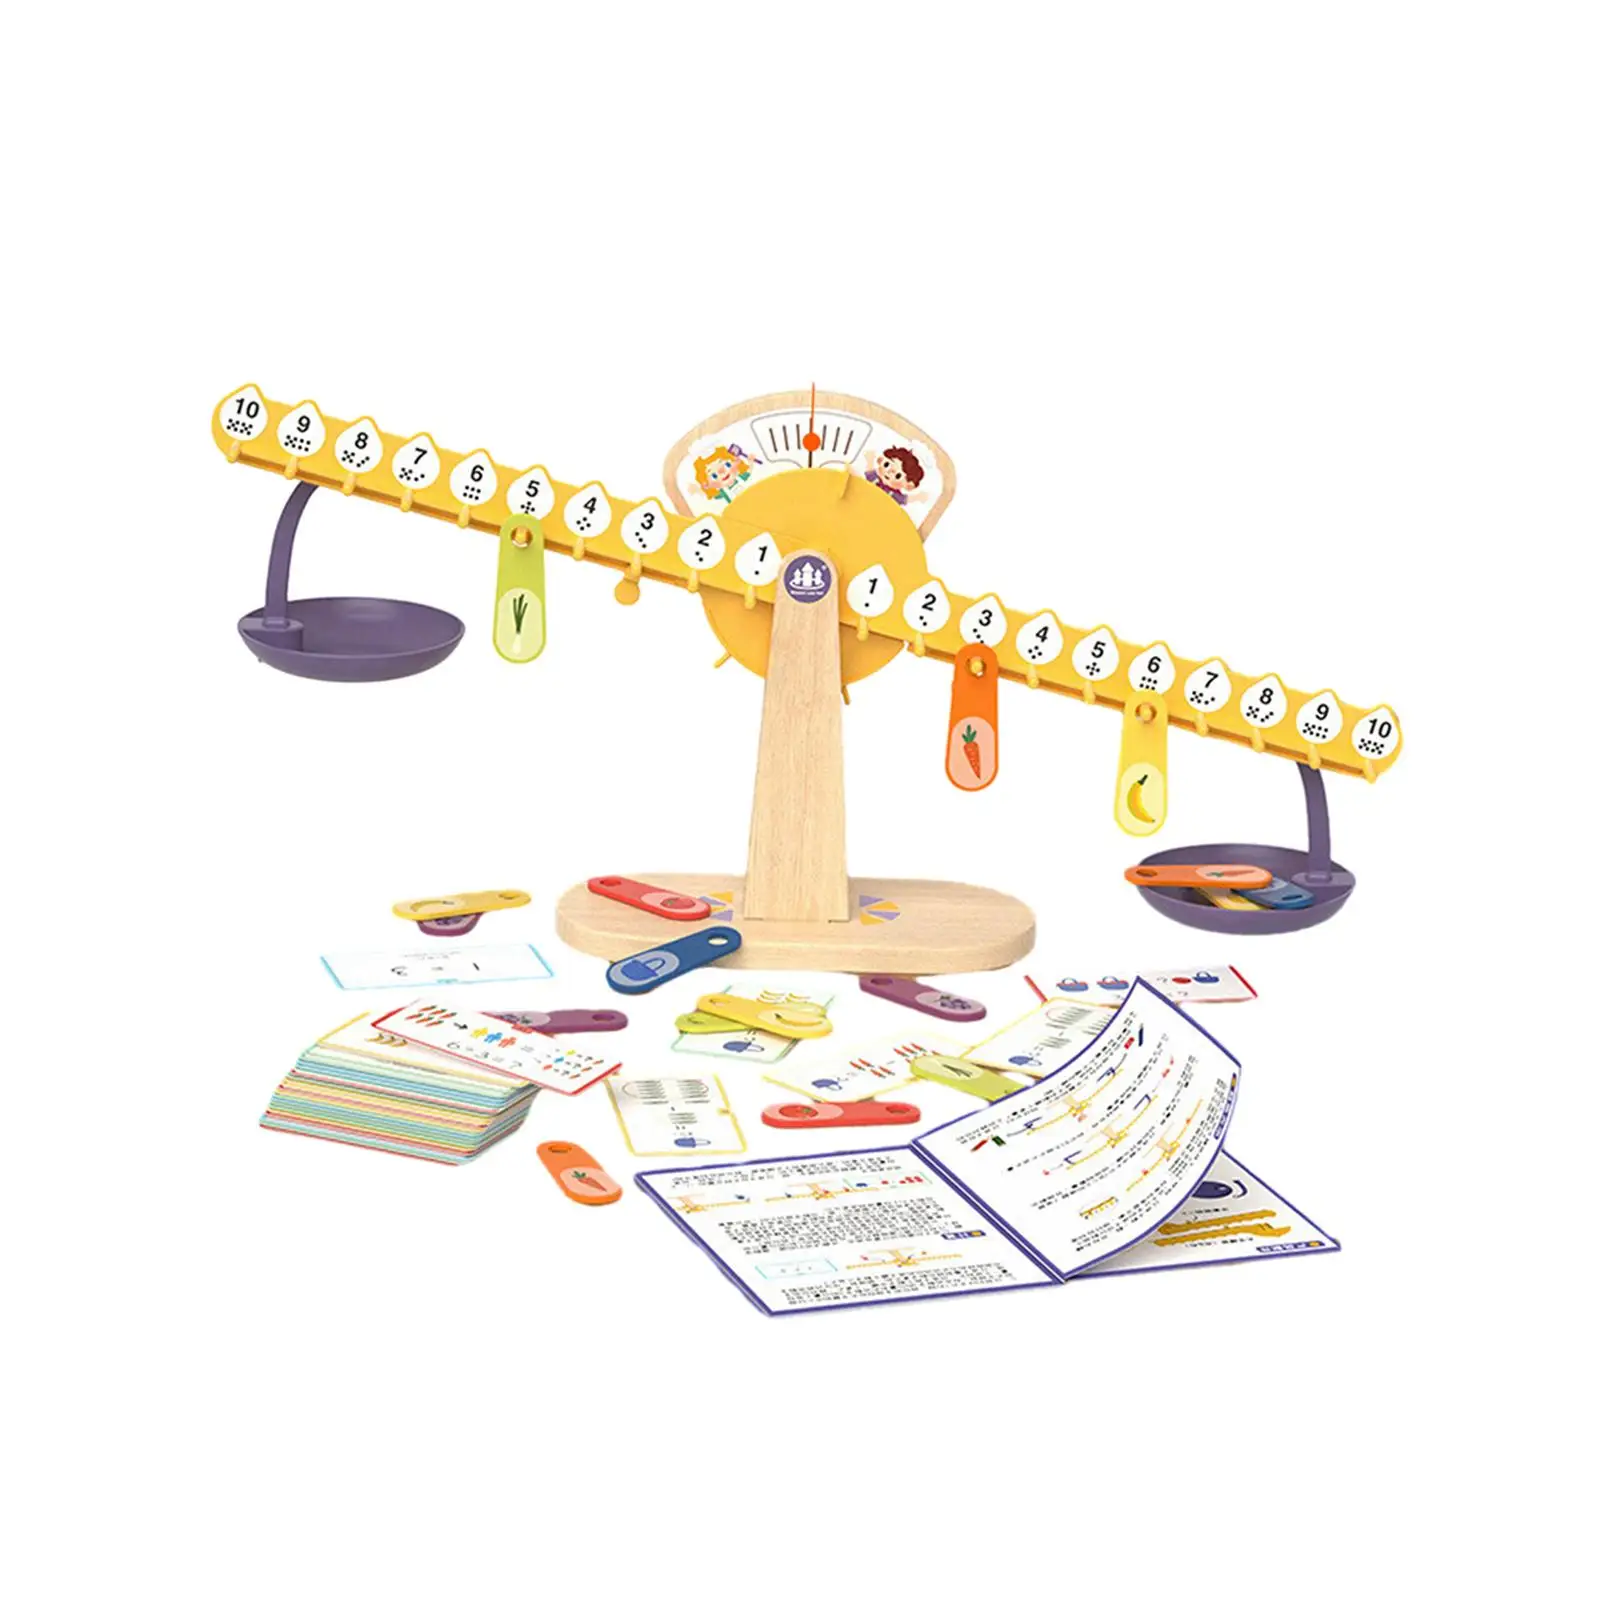 

Math Balance Fine Motor Skill Educational Montessori Toy Math Learning Game for Early Math and Number Concepts for Kindergarten